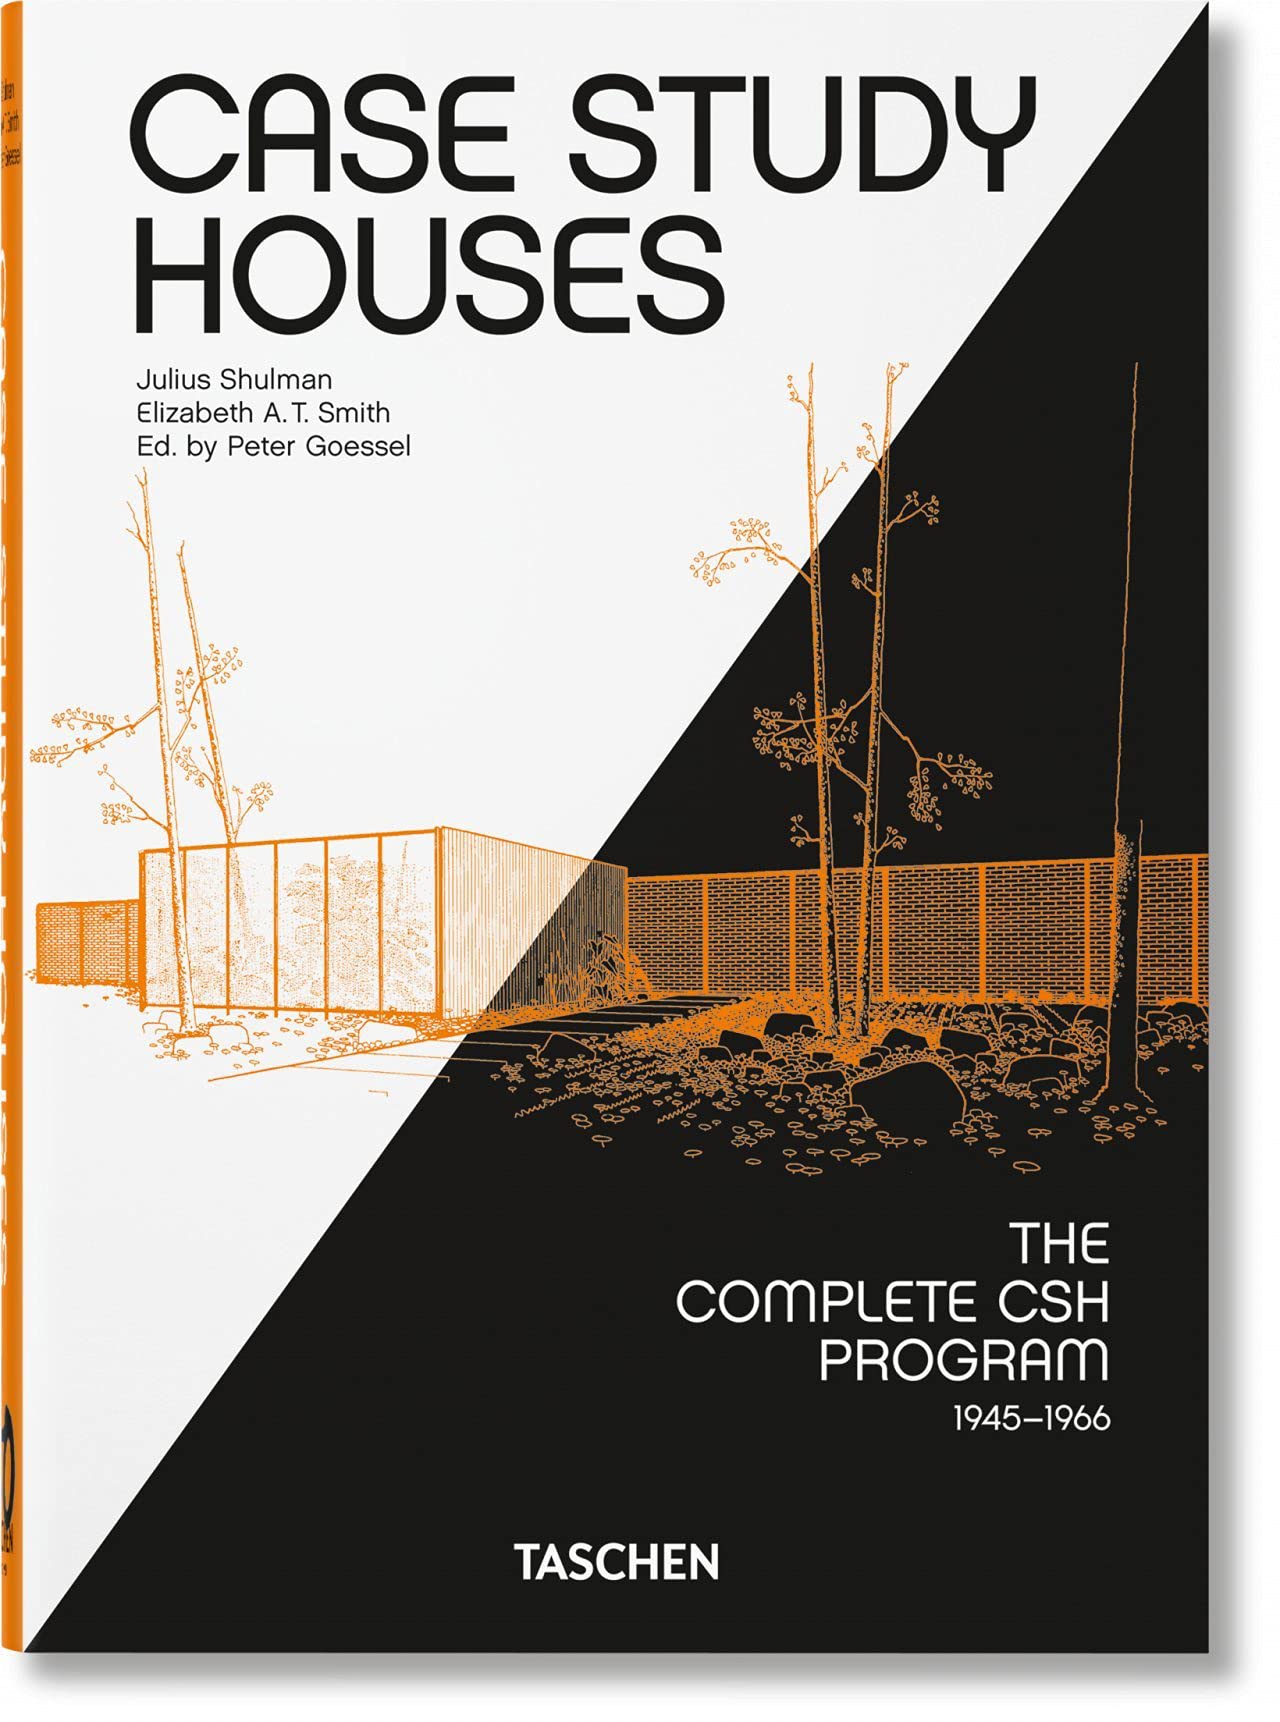  - Case Study Houses (40th Anniversary Edition)